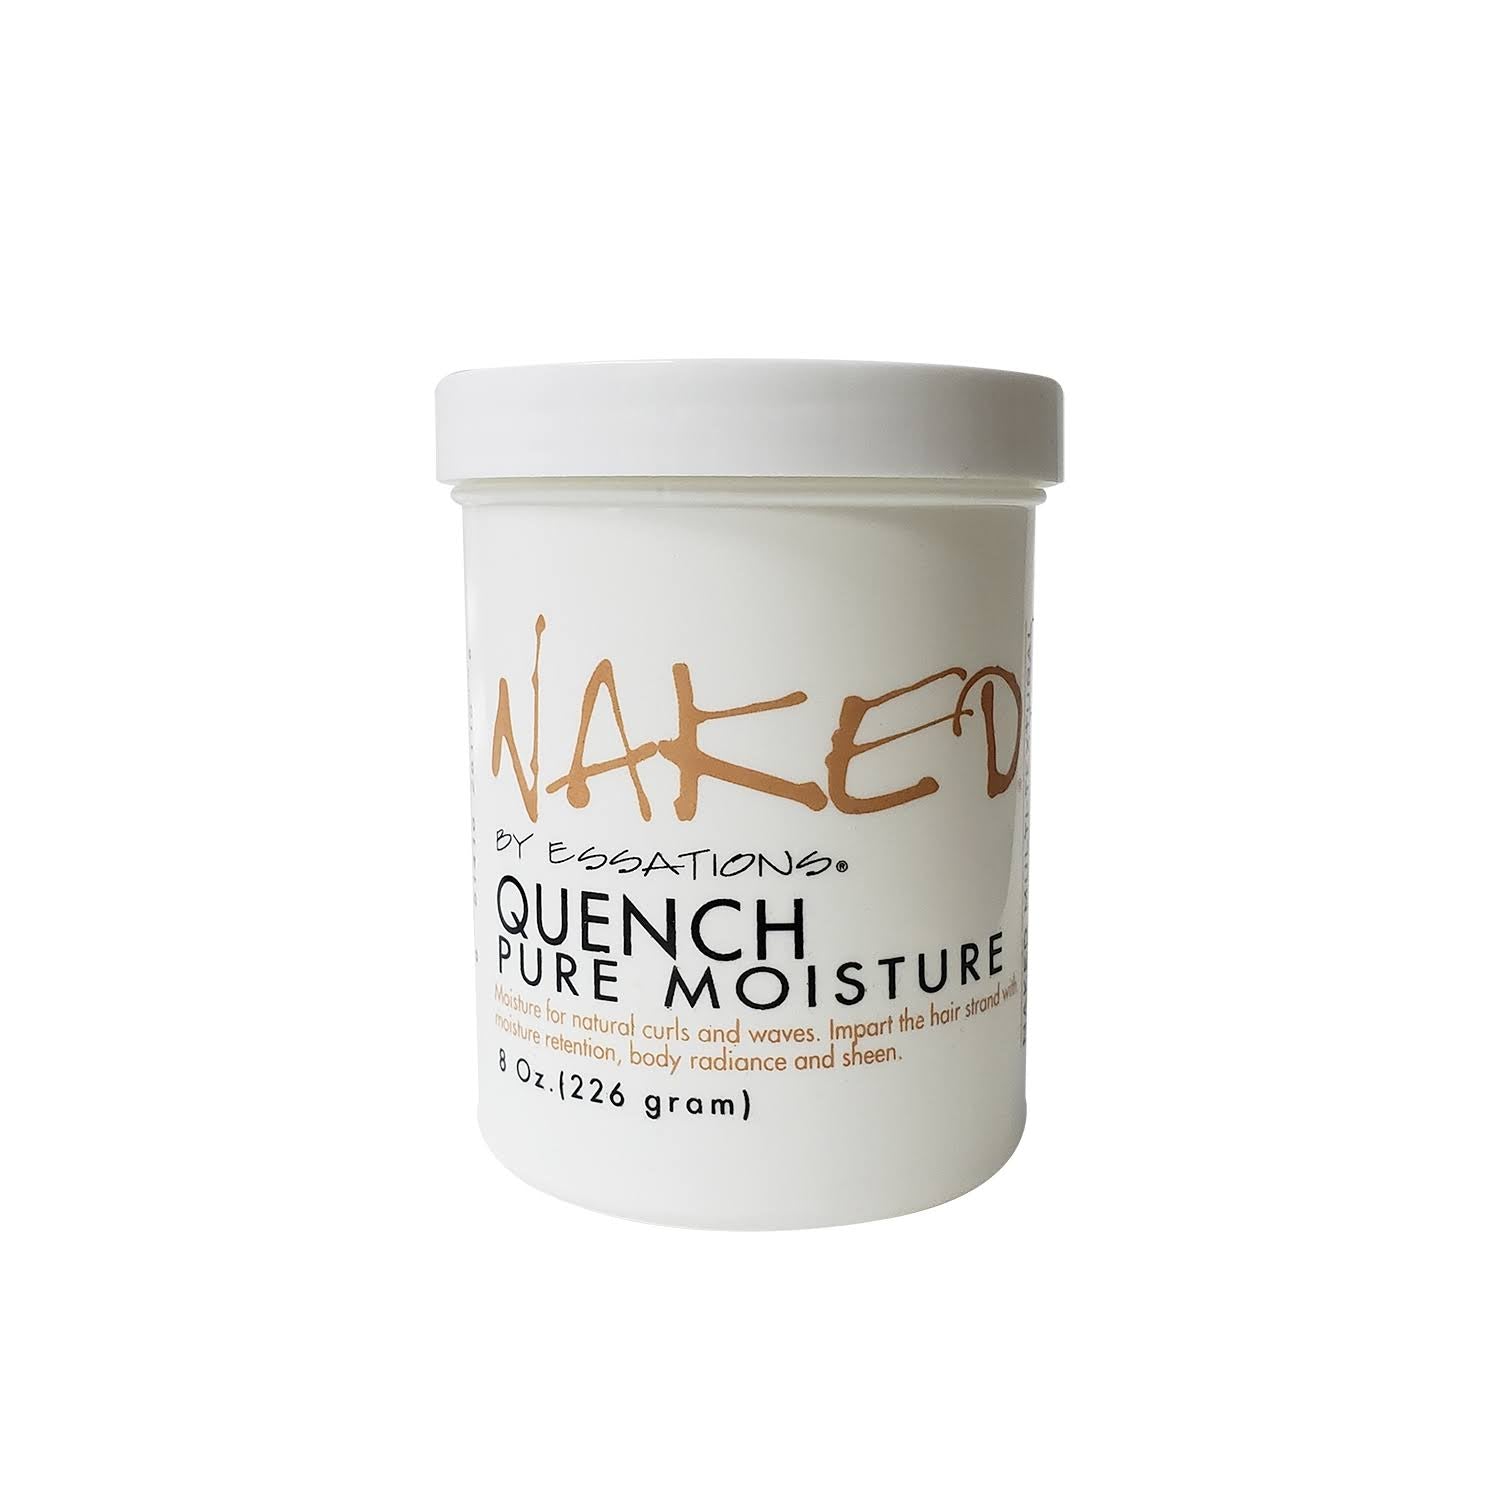 Naked Quench Moisturizing Gel